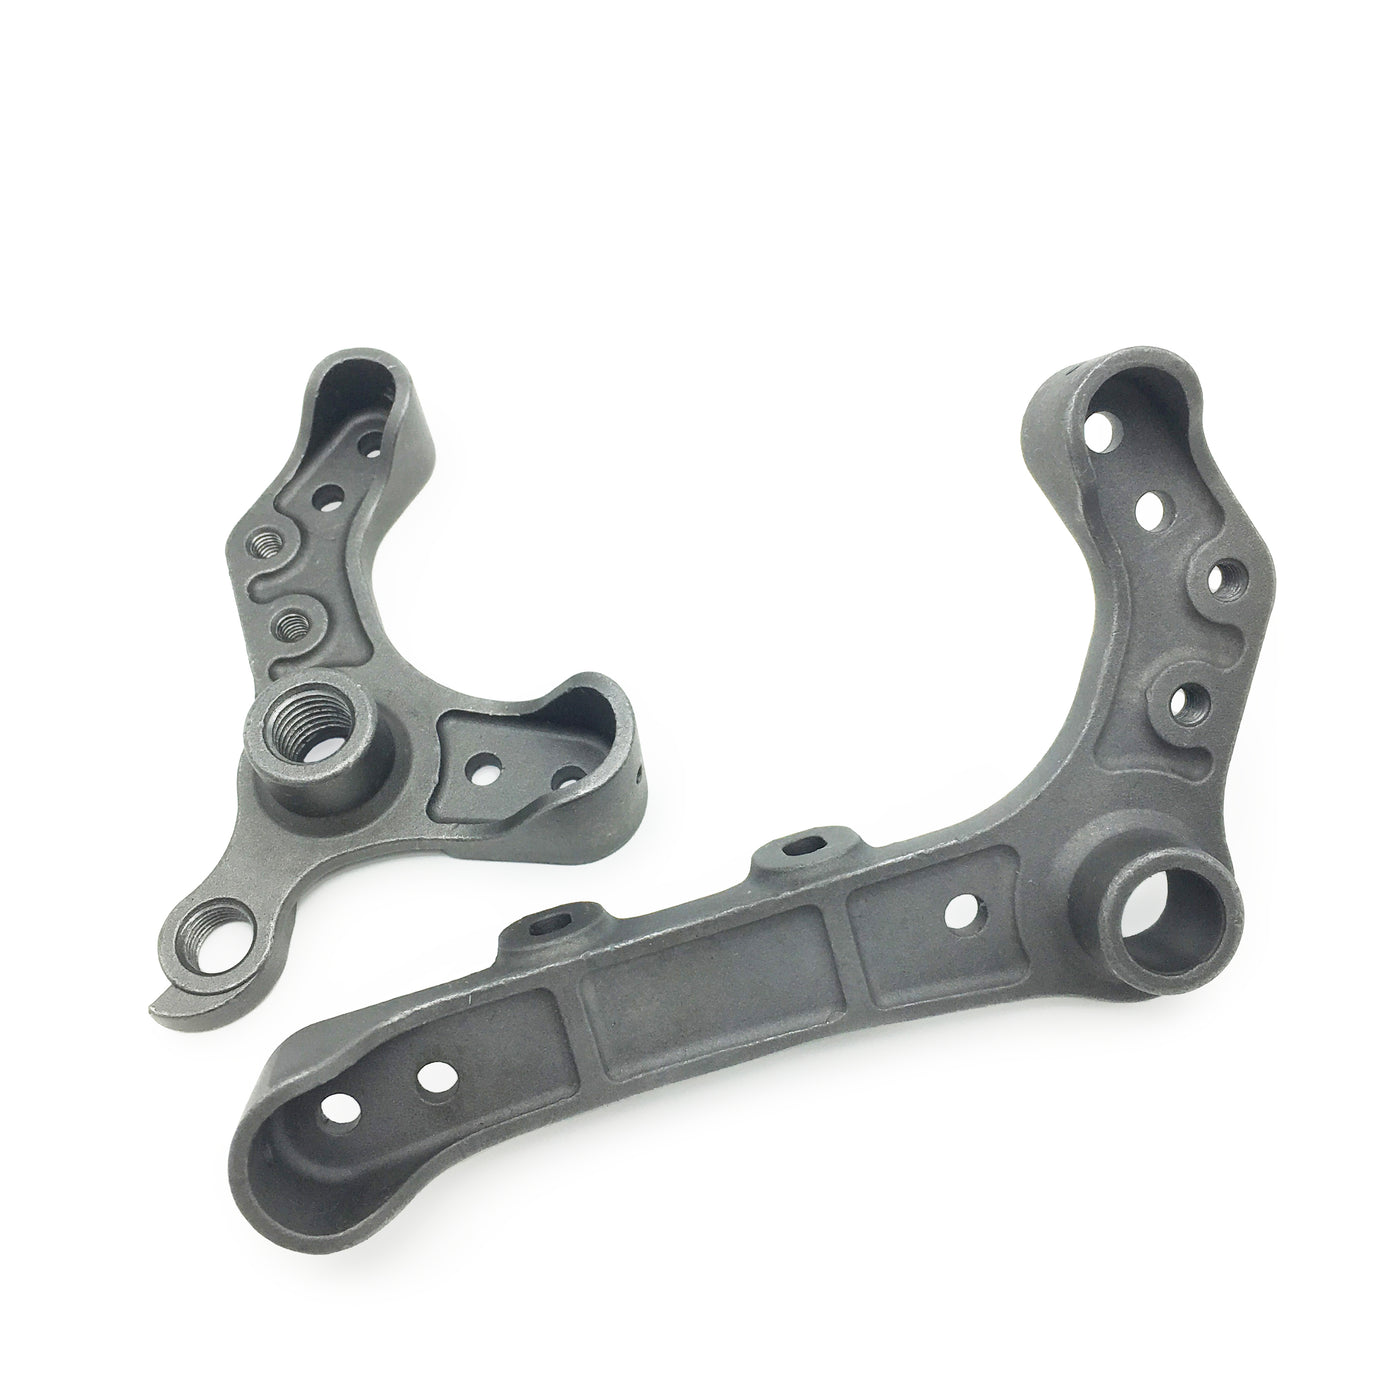 Rear thru-axle (M12 x 1.0) dropouts for flat mount disc brakes - with eyelets